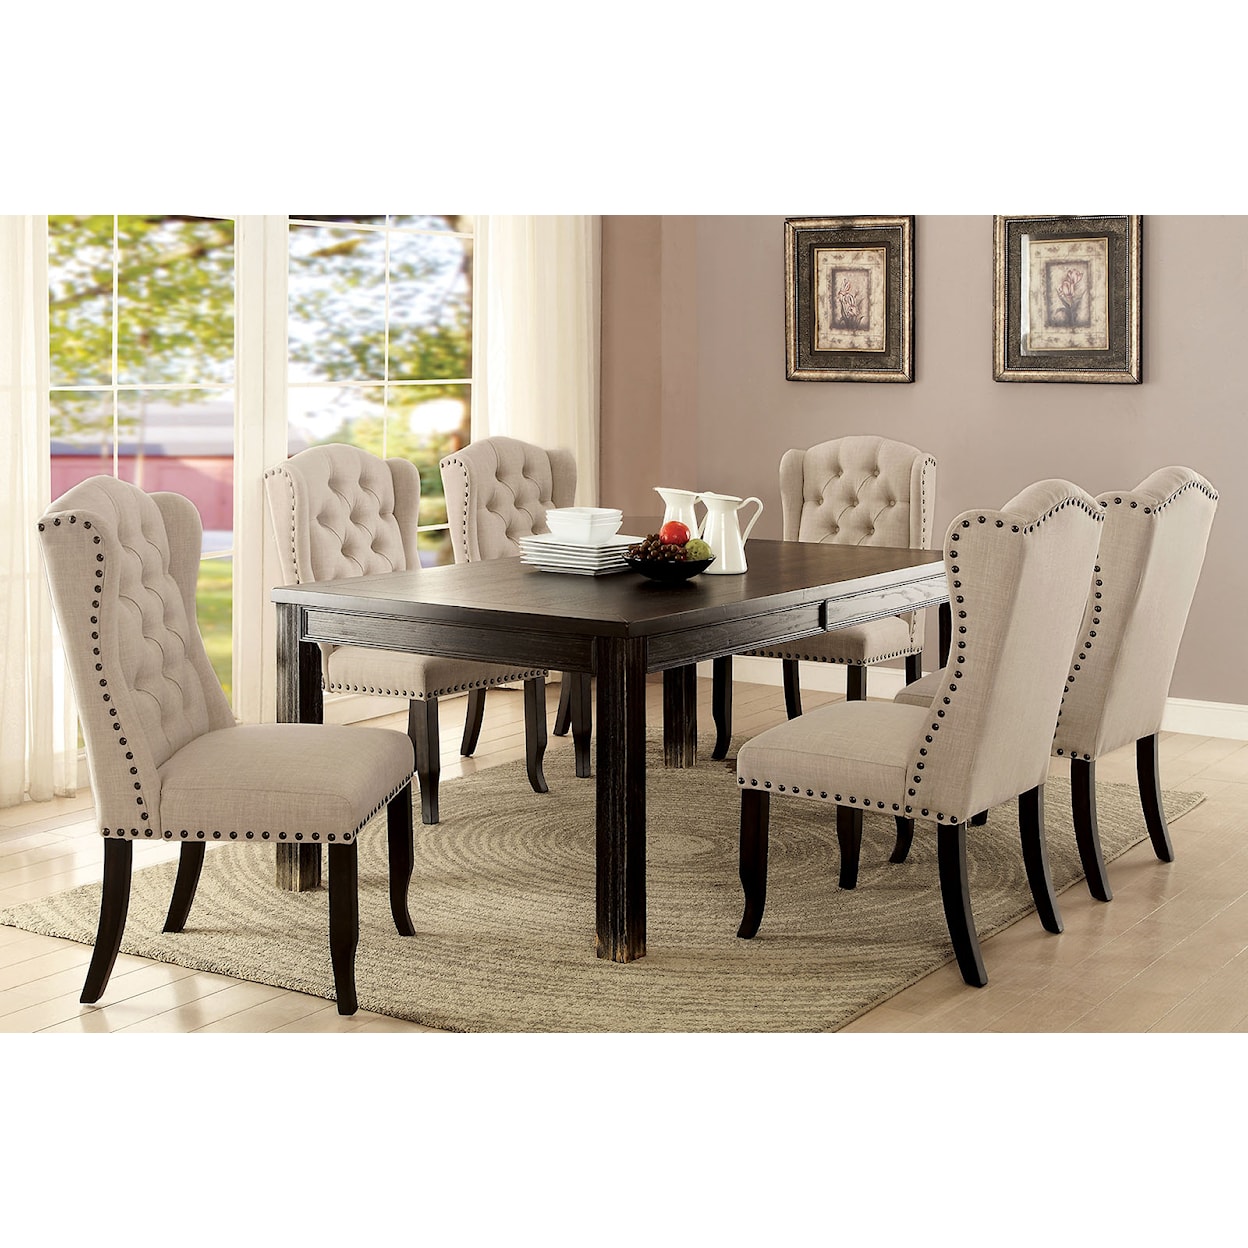 Furniture of America Sania III 7-Piece Table and Chair Set